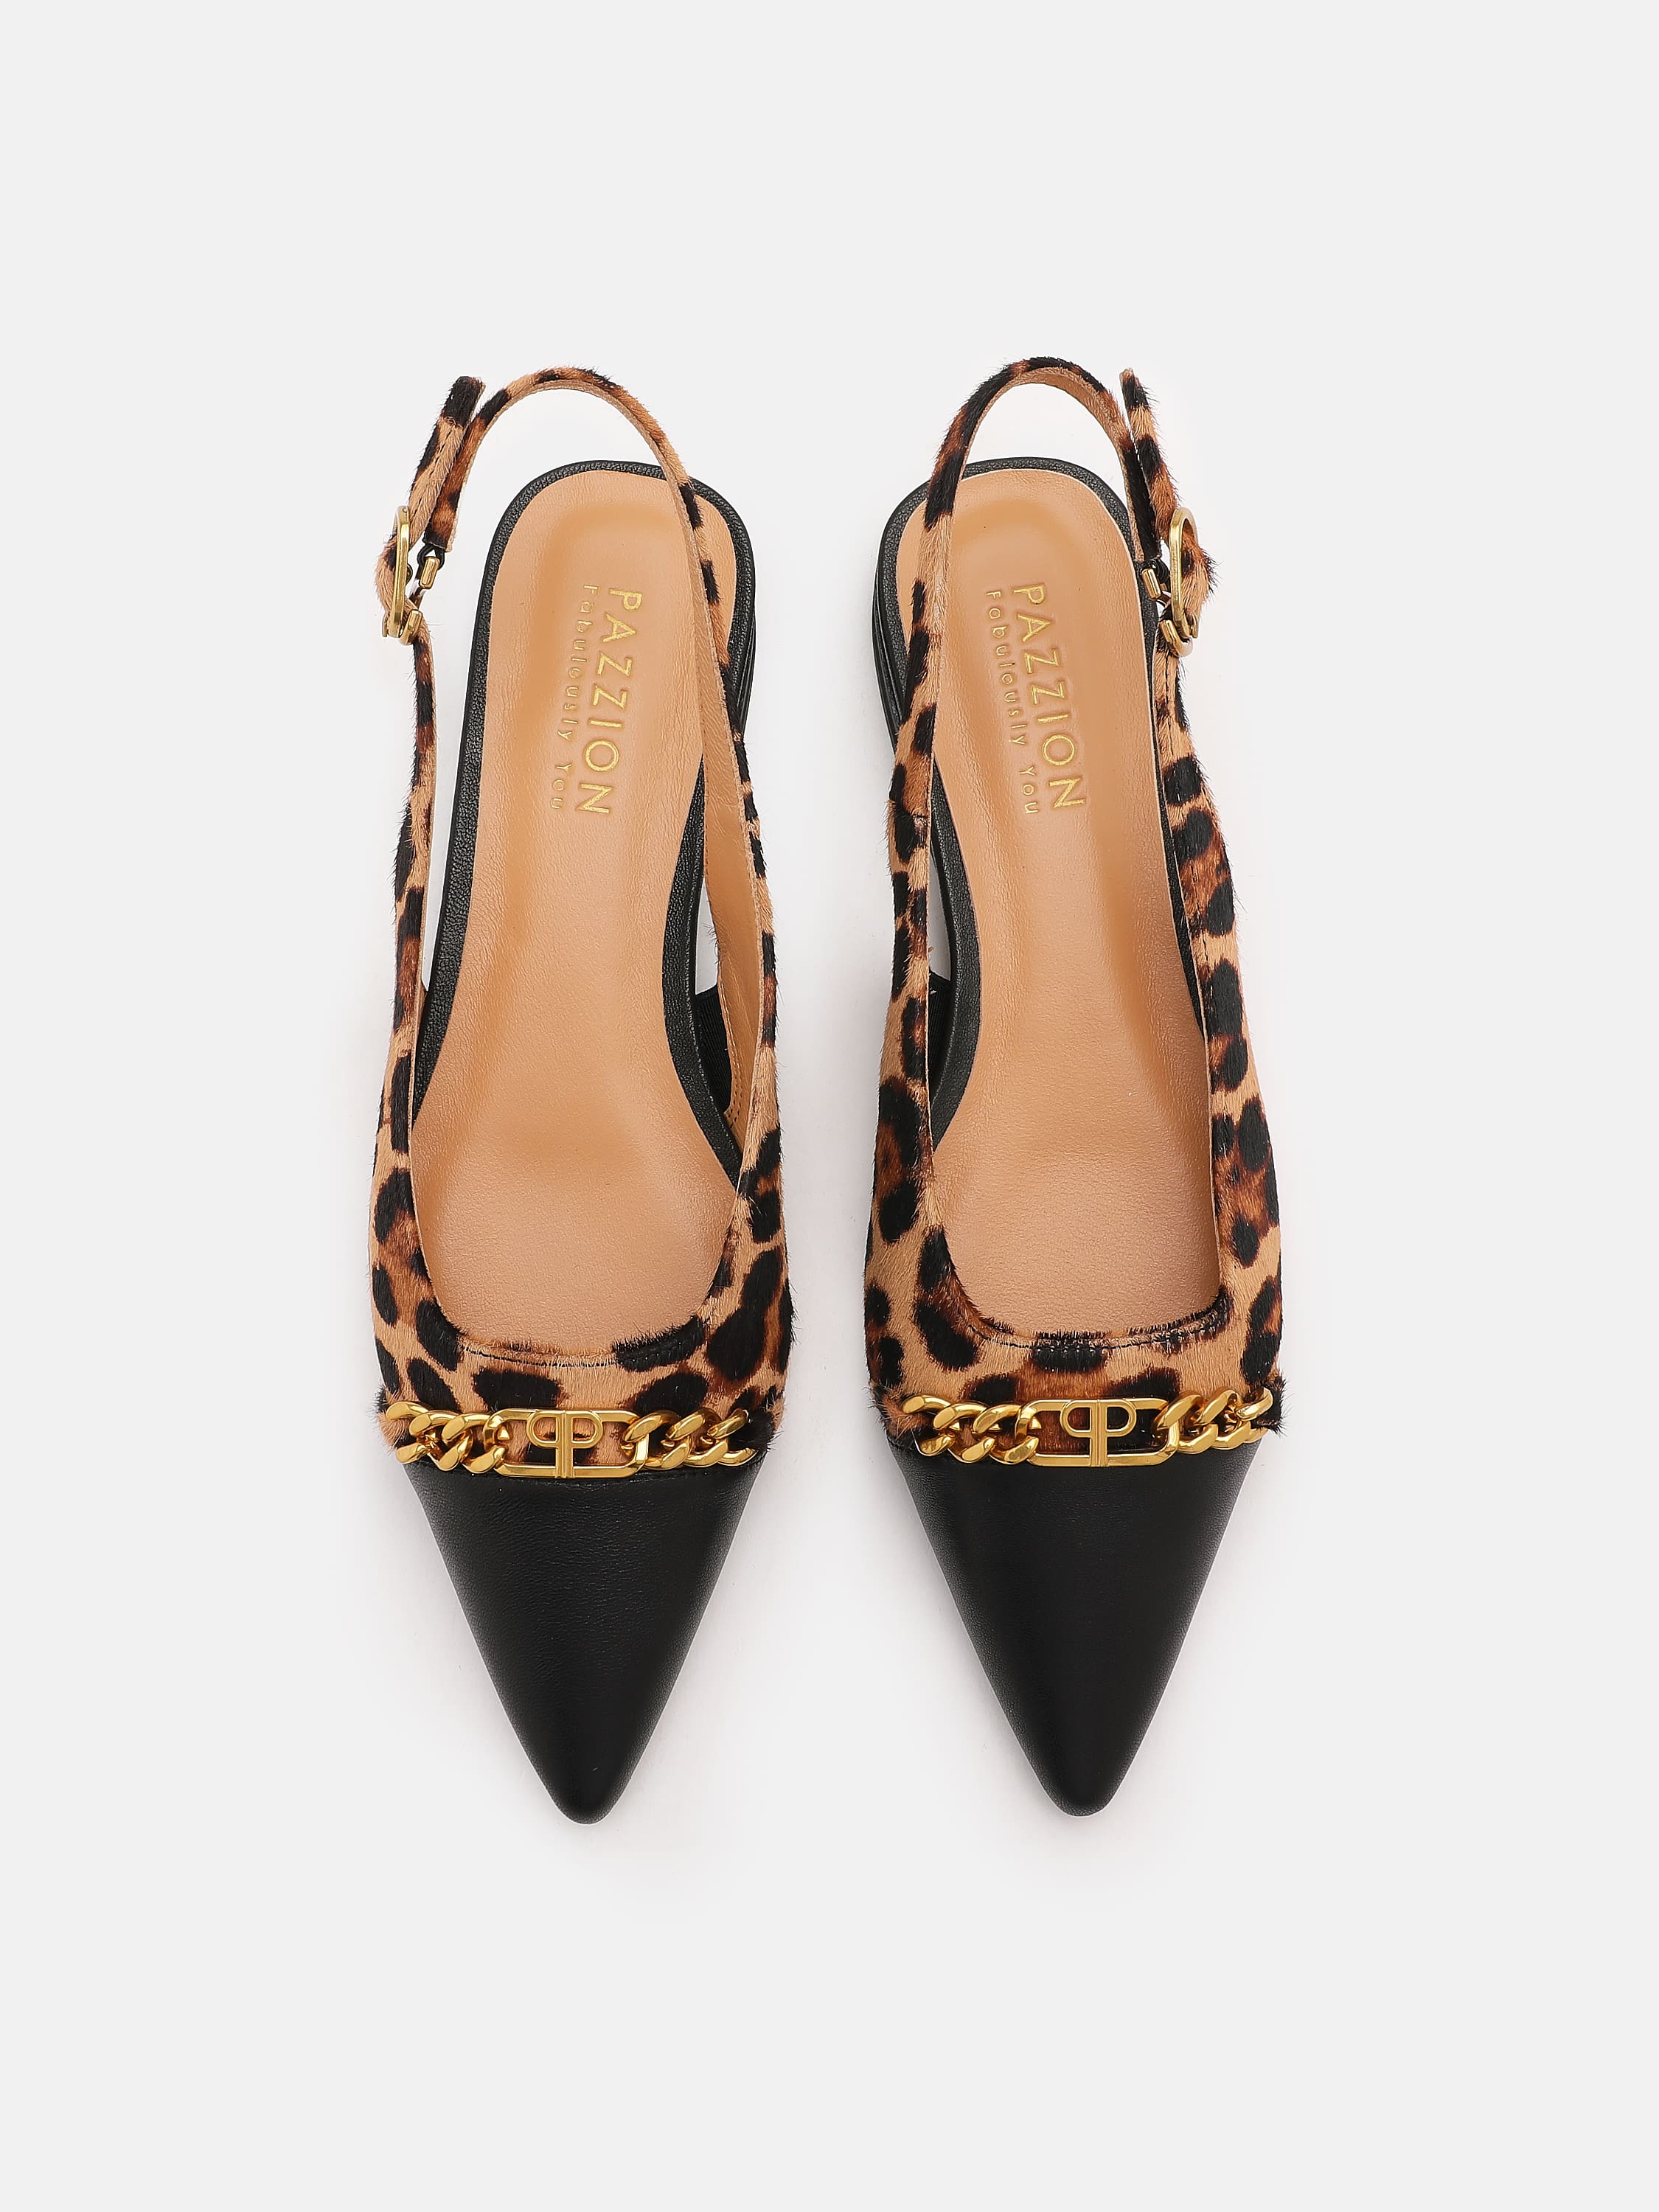 PAZZION, Cleo Leopard Fur Pointed Sling Back Flats, Almond